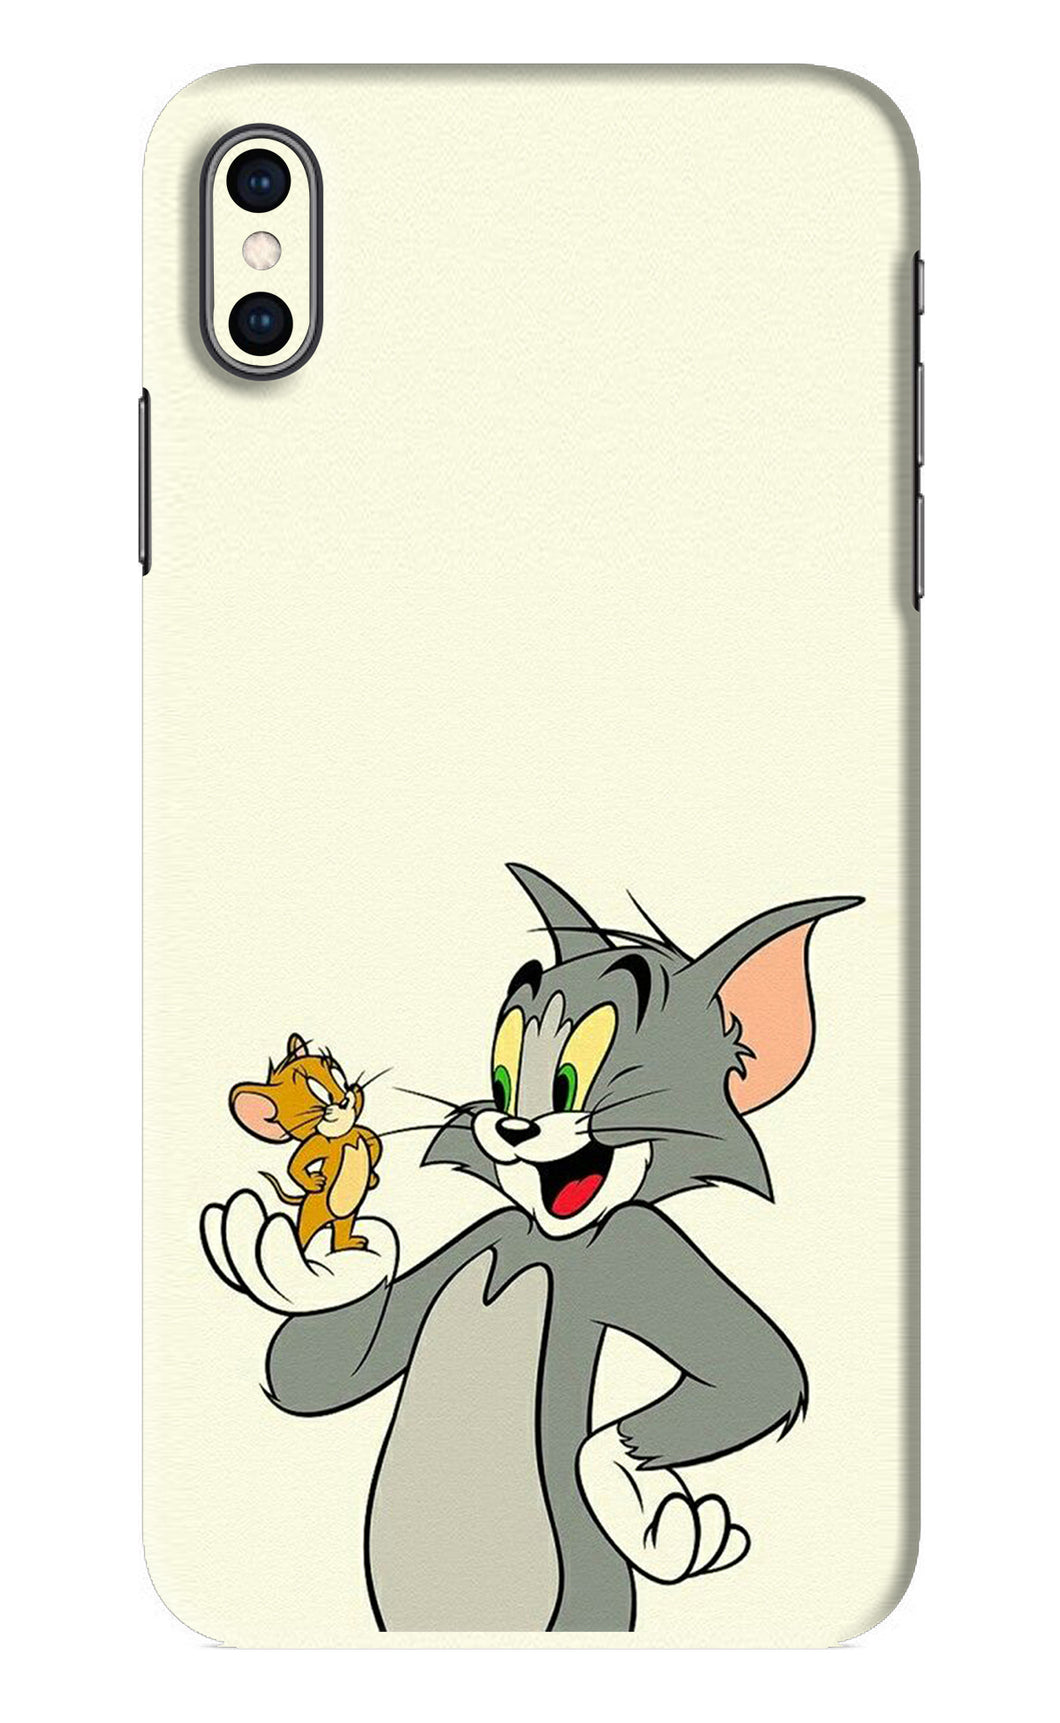 Tom & Jerry iPhone XS Max Back Skin Wrap